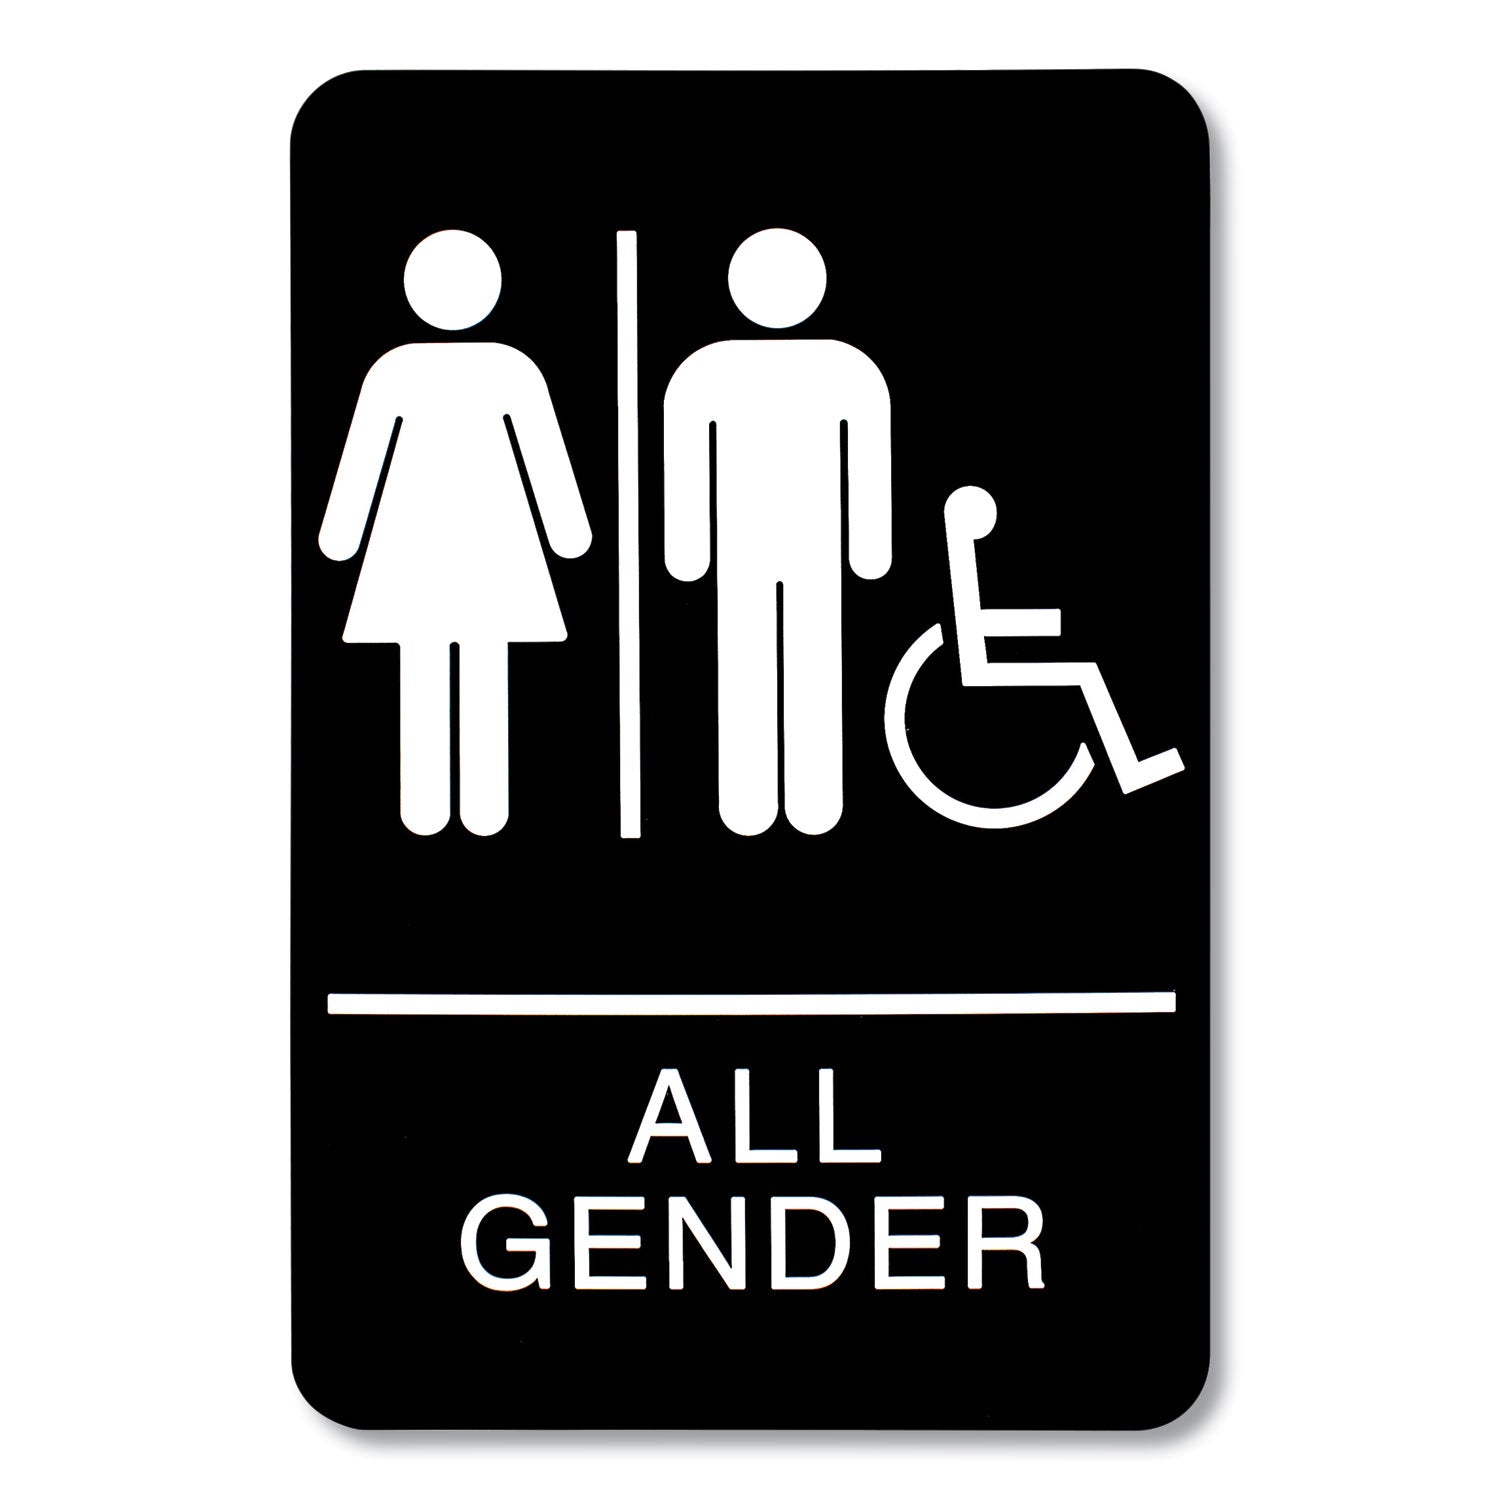 ada-sign-all-gender-wheelchair-accessible-tactile-symbol-plastic-6-x-9-black-white_uss9486 - 1